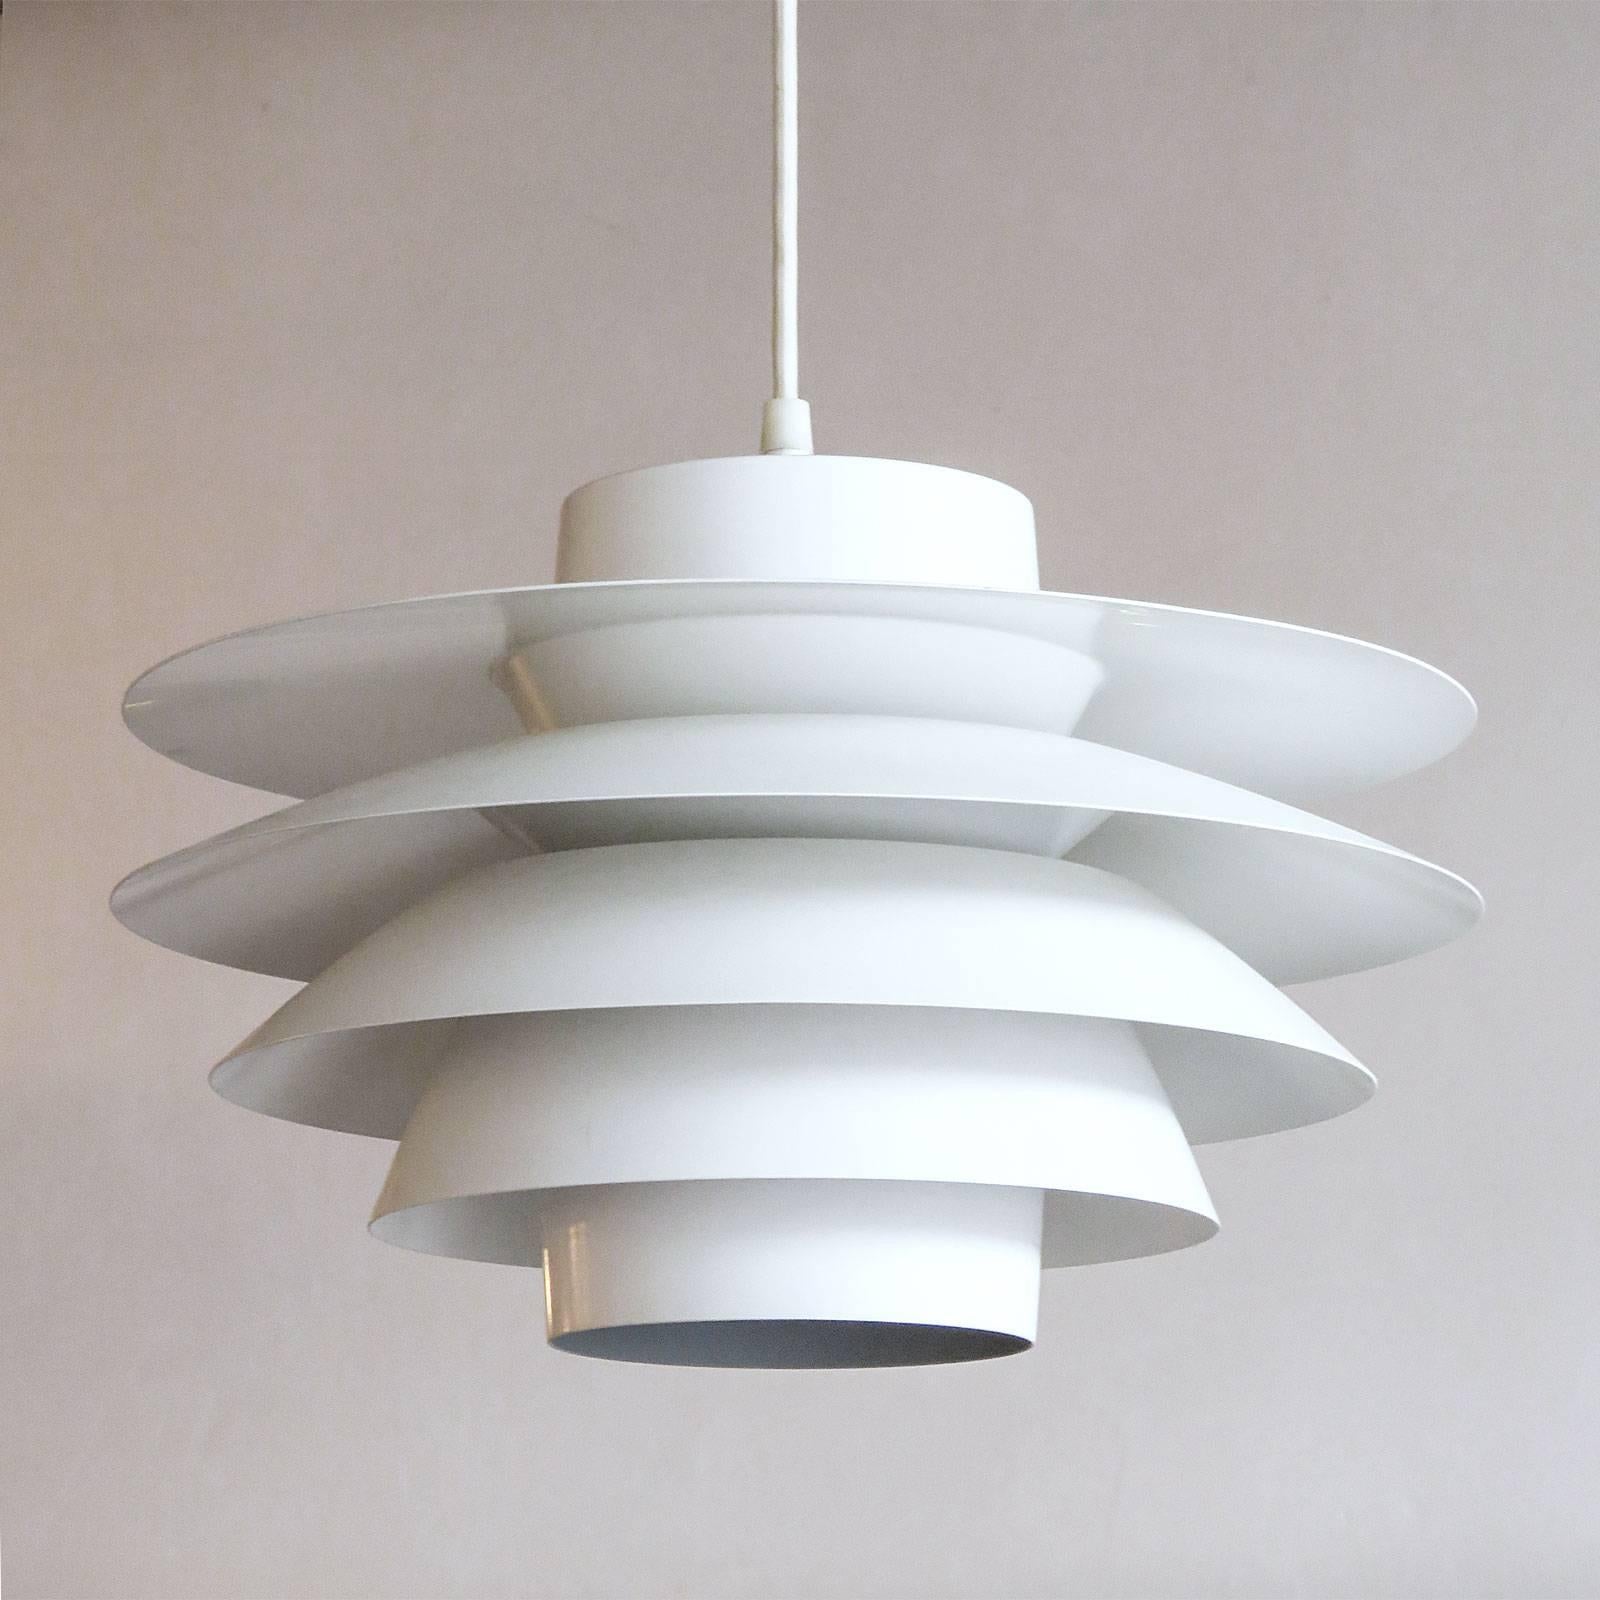 Wonderful large tiered 'Verona' pendants, designed by Sven Middleboe for Nordisk Solar Compagni in Denmark in 1962. These all white five ringed aluminum pendants are perfect for above a dining table, providing a nice soft diffused light. ONE